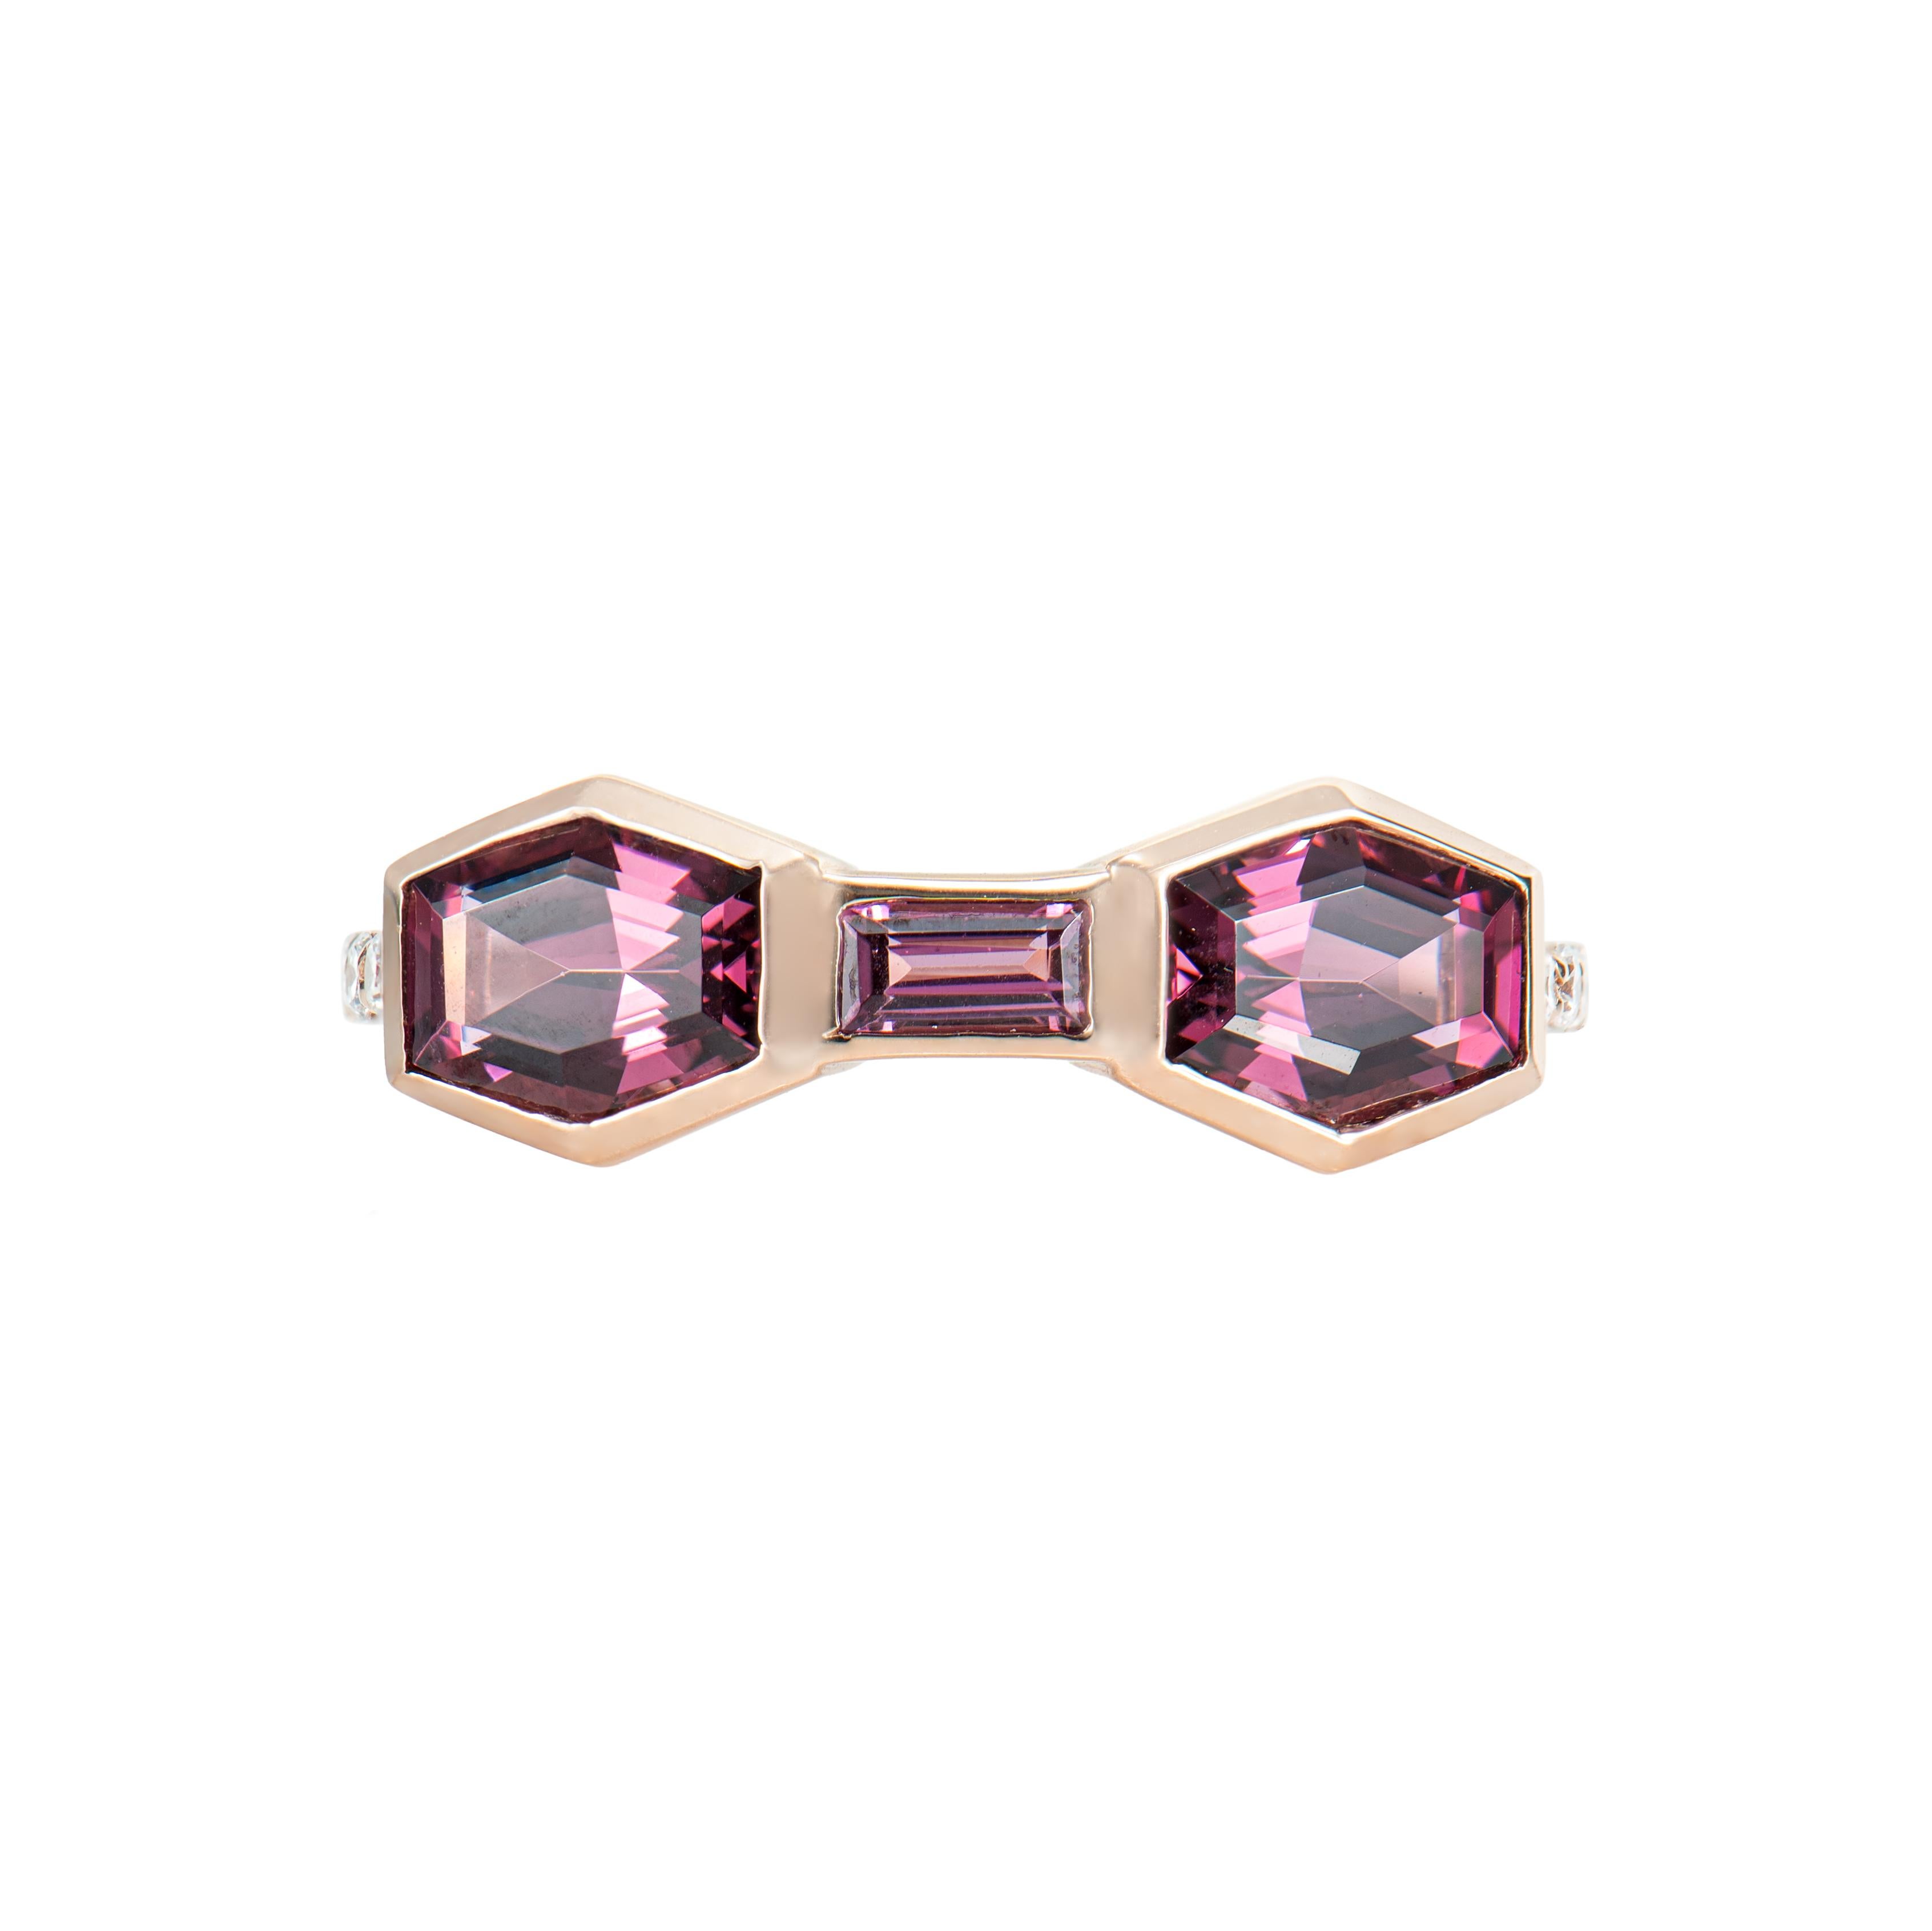 Contemporary 2.18 Carat Rhodolite Fancy Ring in 14Karat Rose Gold with Diamond. For Sale